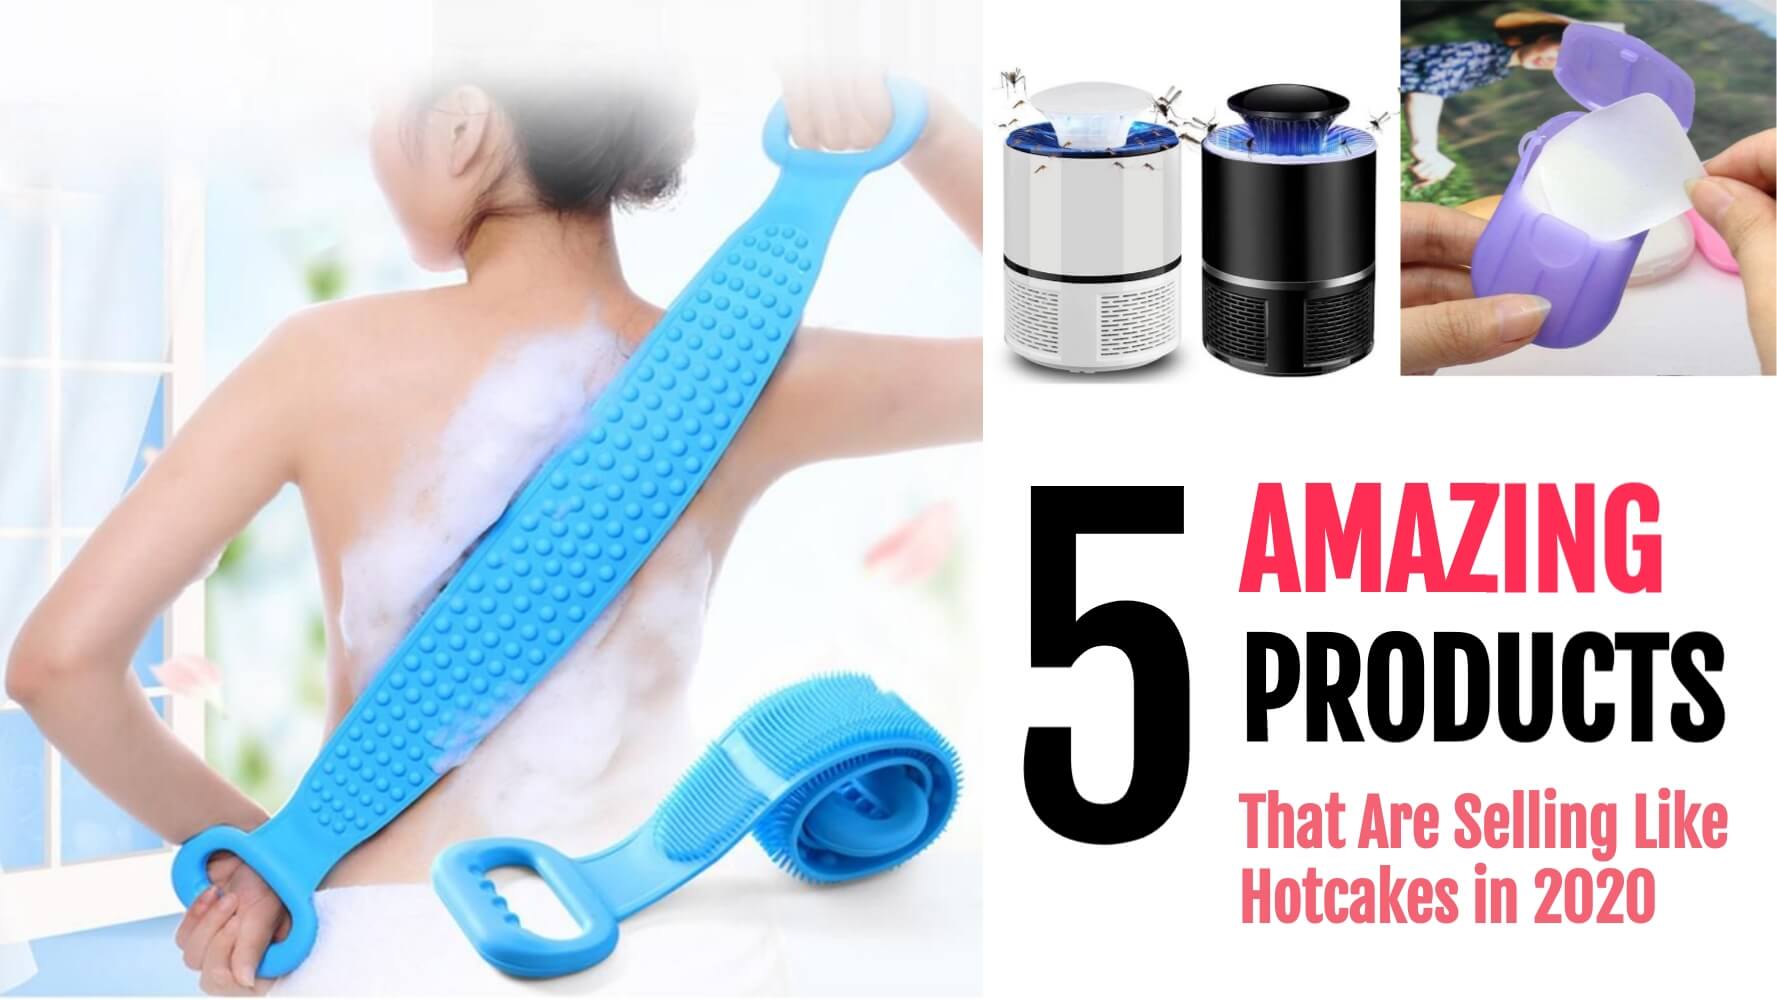 5 Amazing Products That Are Selling Like HotCakes (2020)